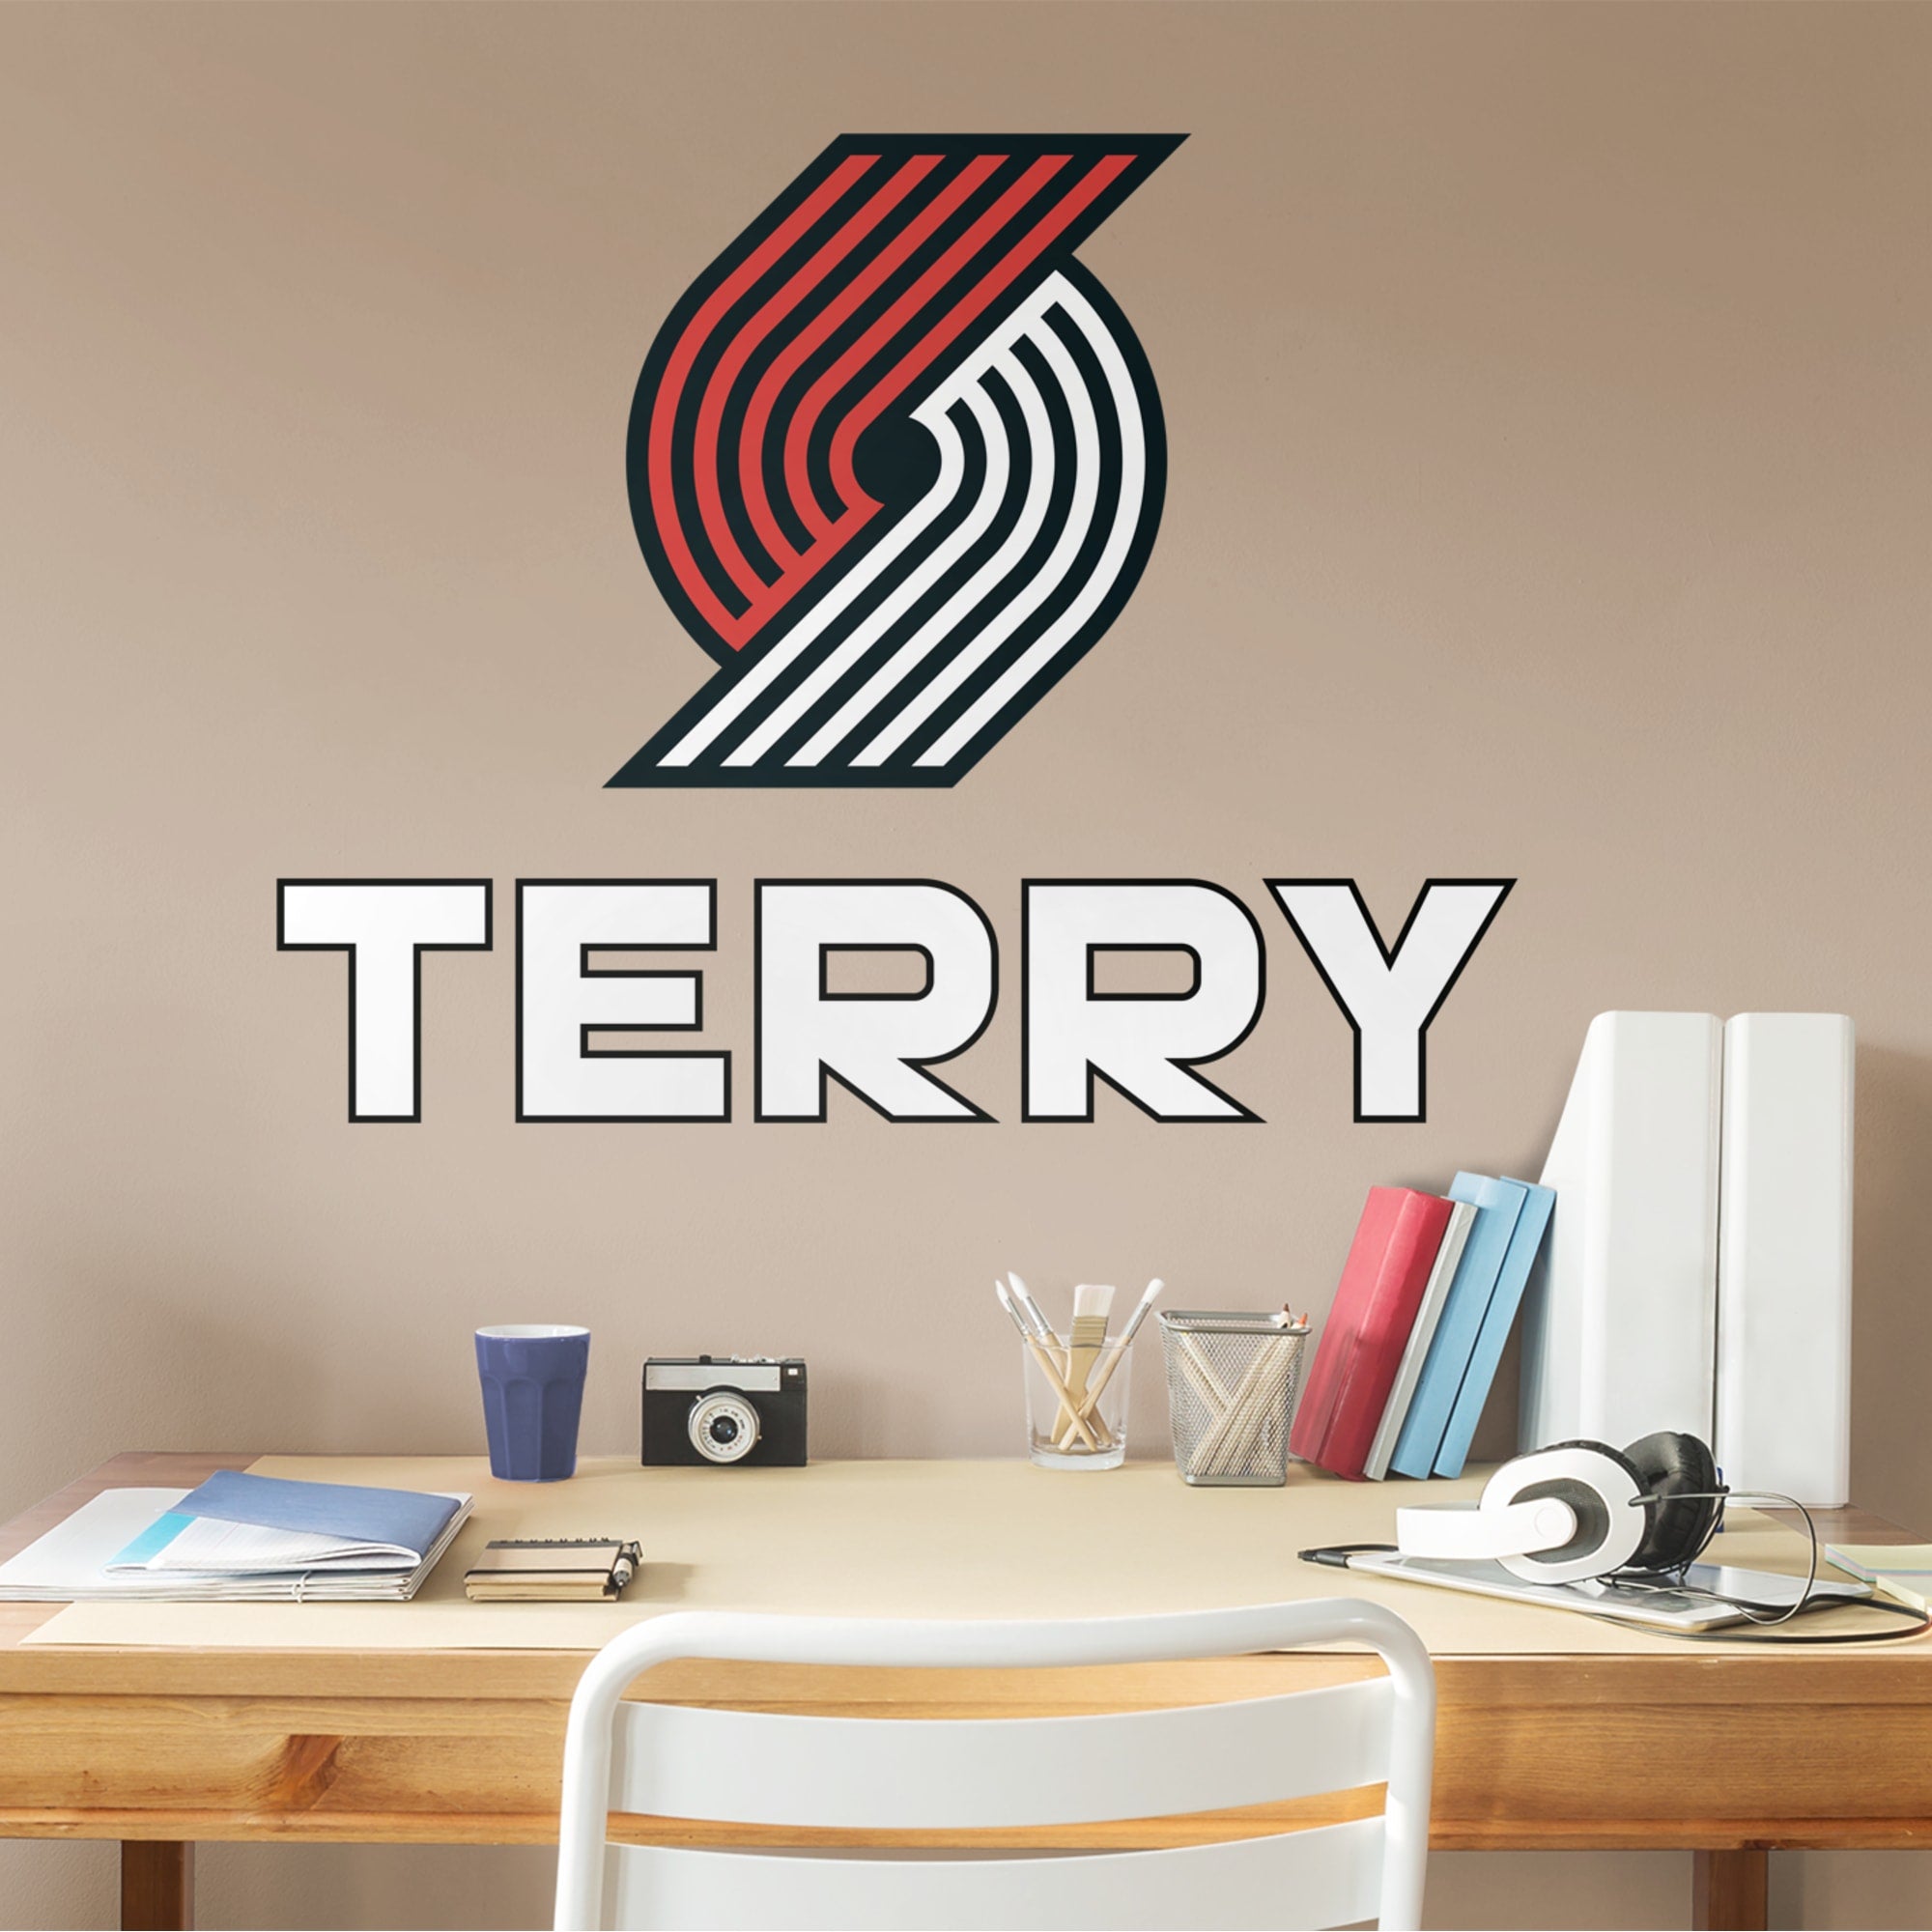 Portland Trail Blazers: Stacked Personalized Name - Officially Licensed NBA Transfer Decal in White (39.5"W x 52"H) by Fathead |